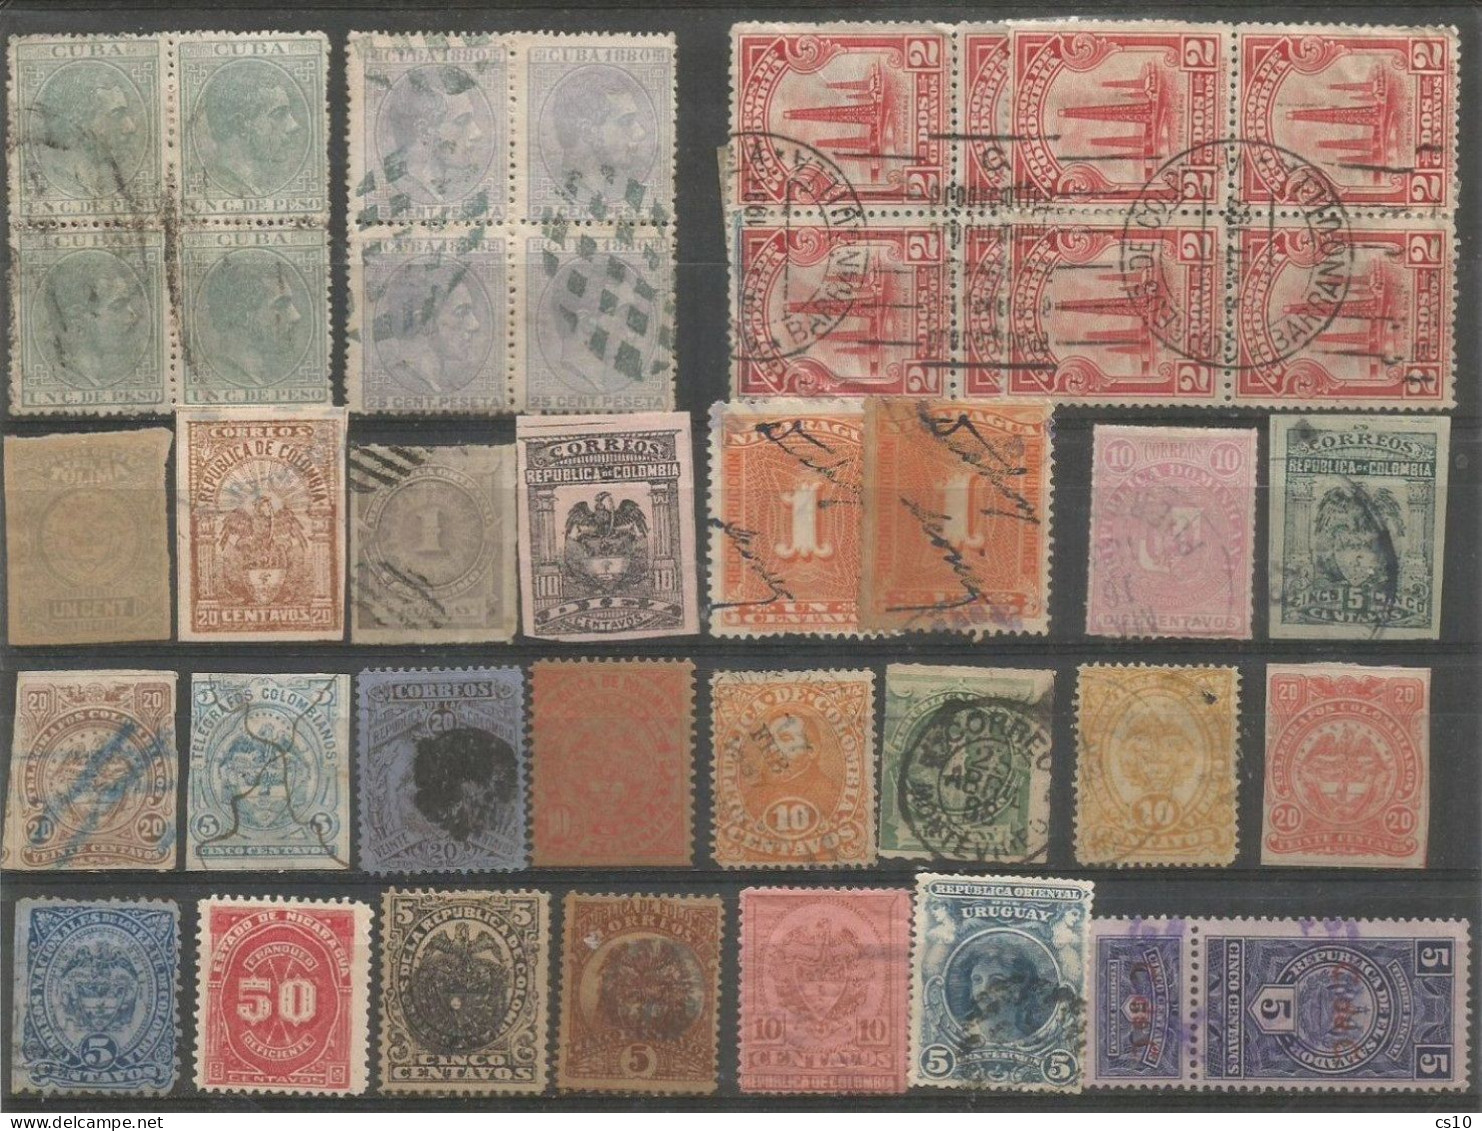 Latin America 4 Scans Lot Used Stamps With Older, Blocks4, Provisionals, FRAMA, Imperforated, Fiscals Etc # 235 Pcs - Colecciones (sin álbumes)